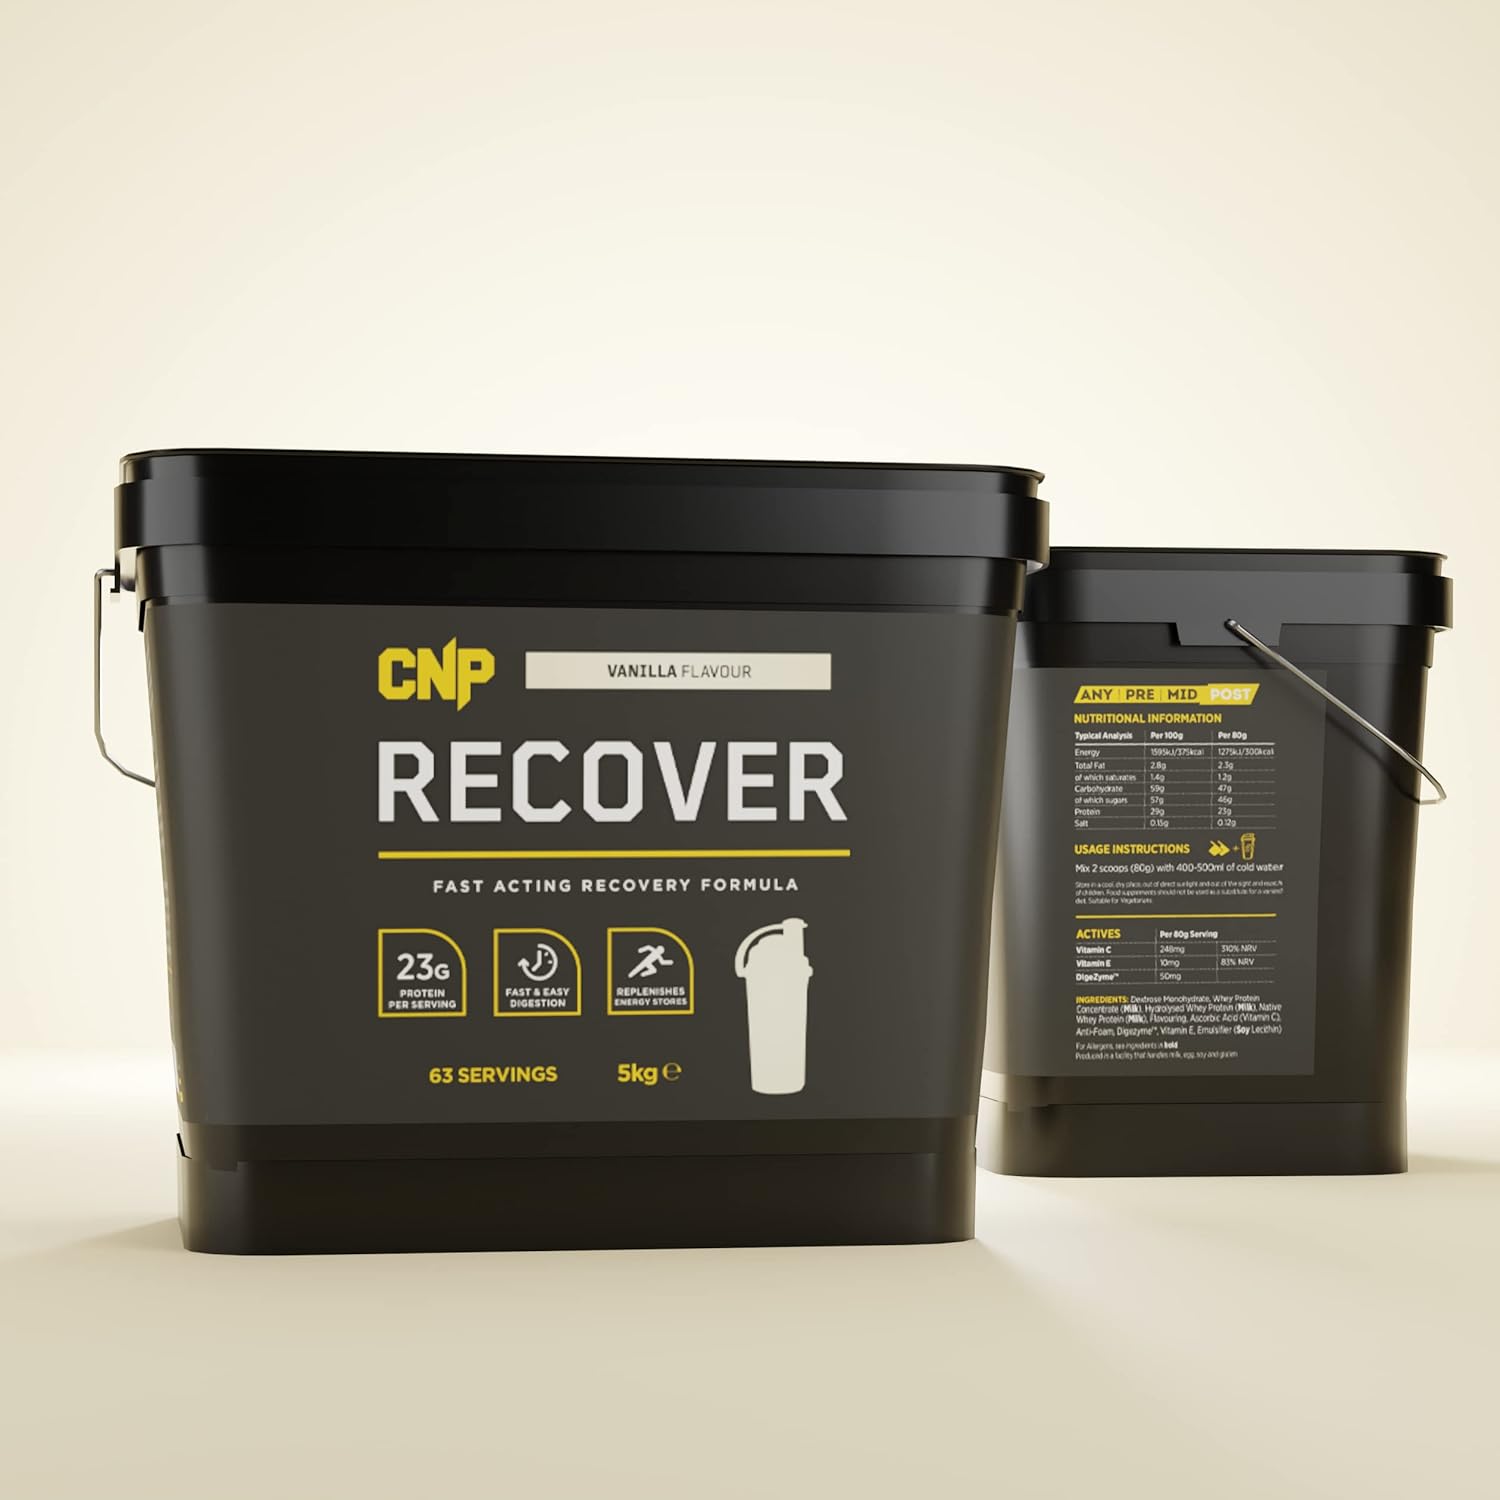 CNP Professional Recover, Fast Acting Post Exercise Recovery Formula, 